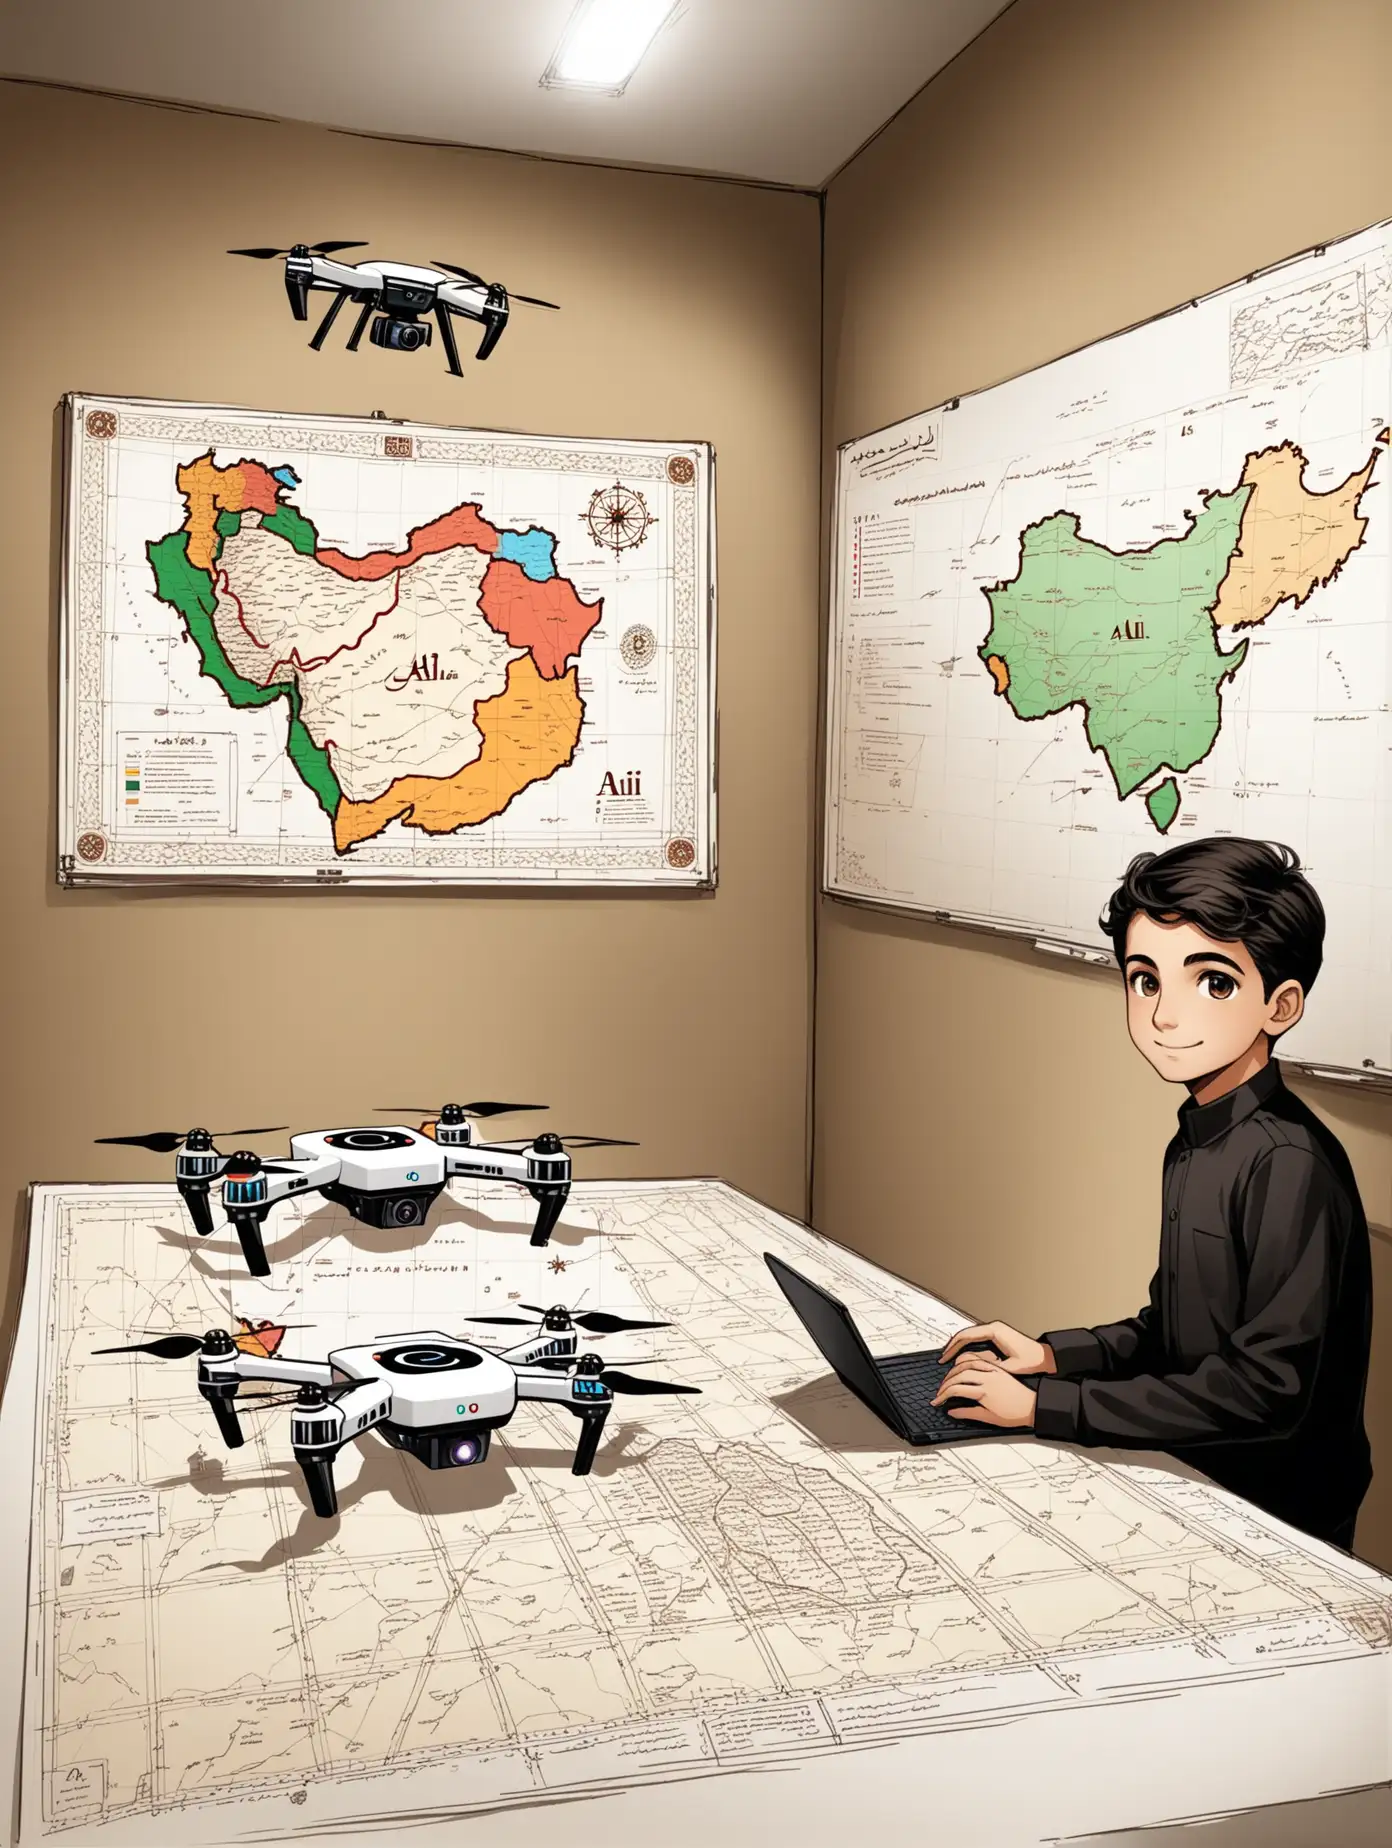 Persian Boys Designing HighTech Drones in 2124 Shed Workshop